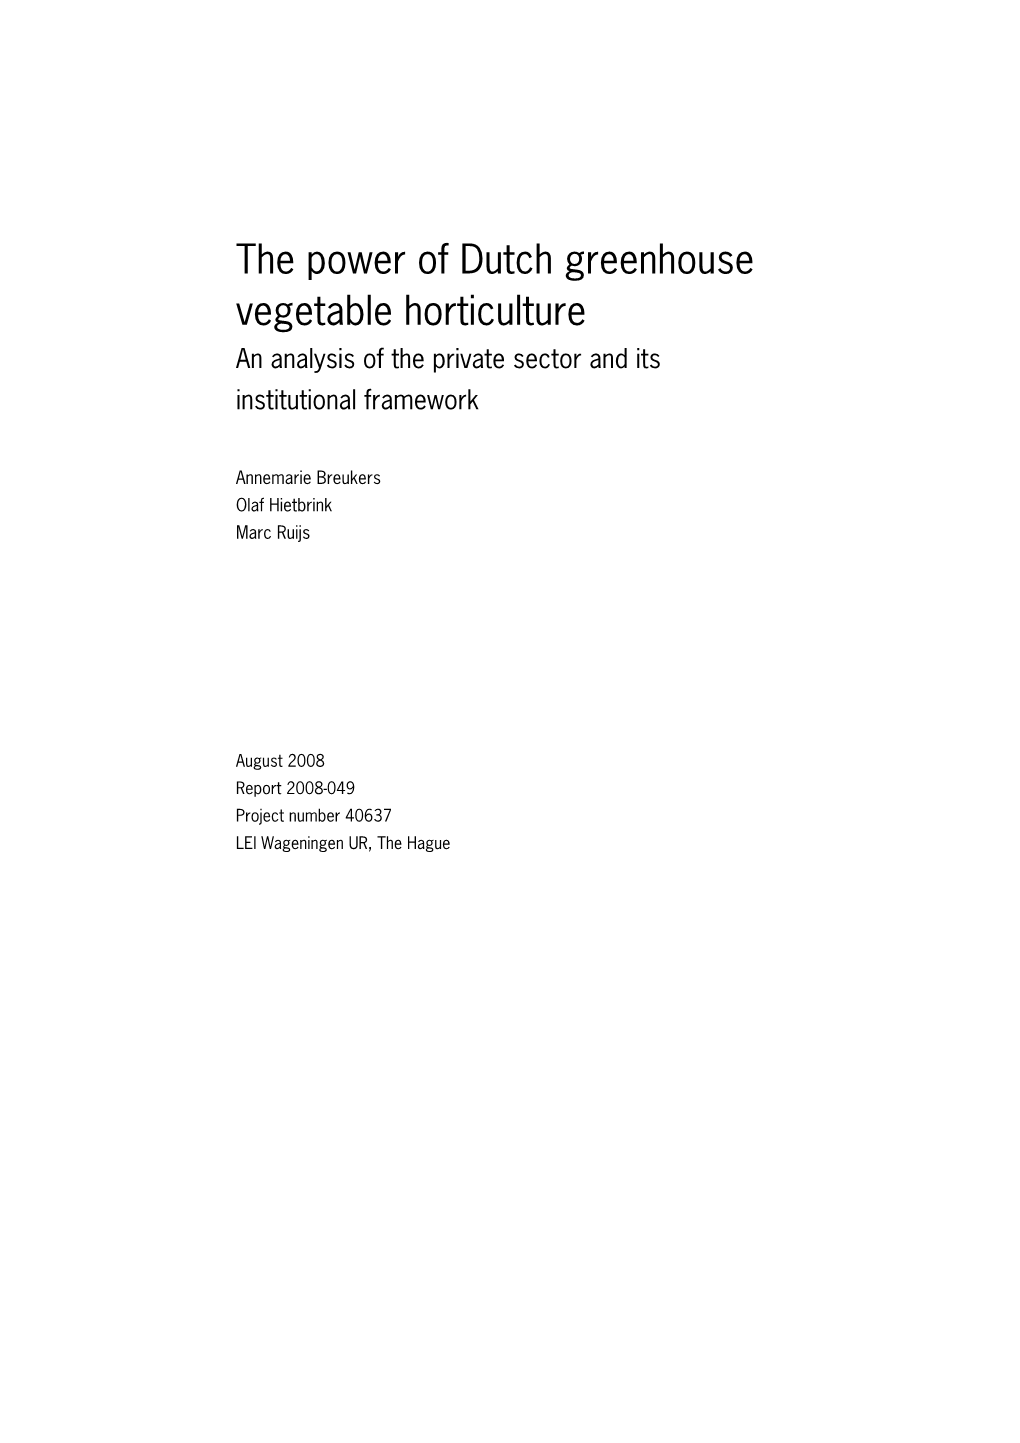 The Power of Dutch Greenhouse Vegetable Horticulture